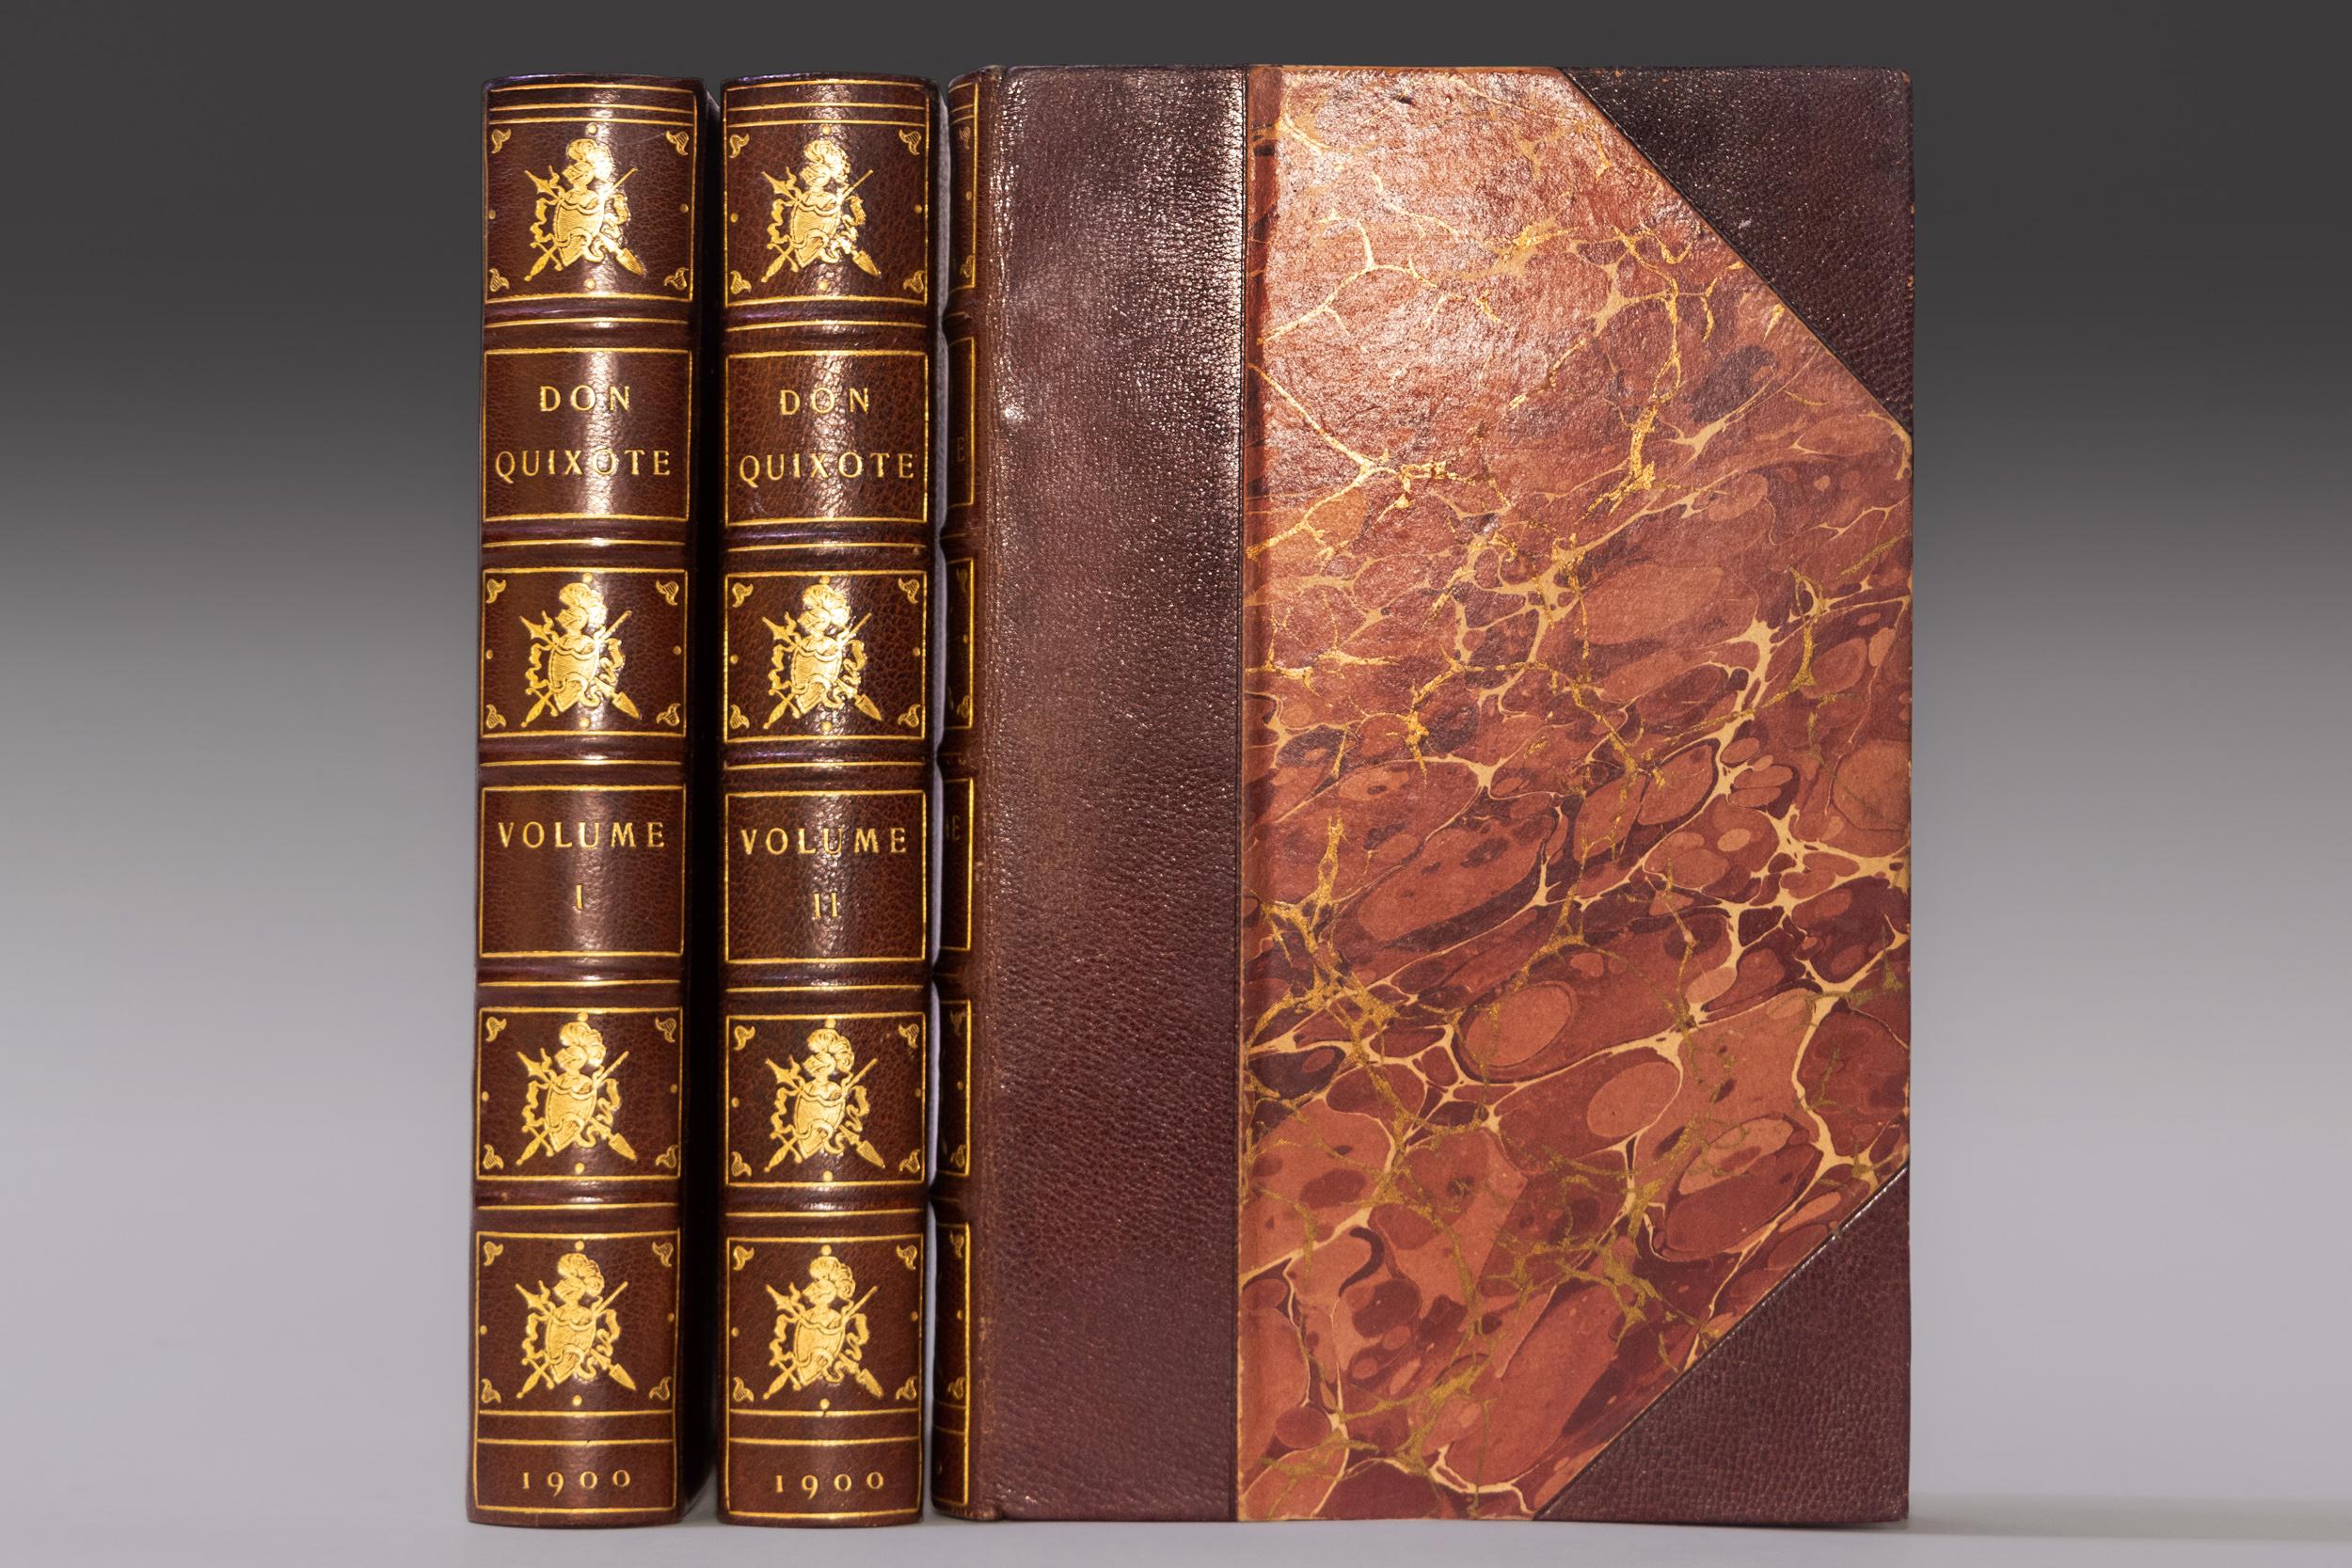 3 Volumes. Miguel De Cervantes, The History of the Valorous and Witty Knight-Errant Don Quixote of the Mancha. Bound in 3/4 wine morocco. Marbled boards. Raised bands. Gilt-tooled knight symbol on spine. Top edges gilt. Marbled endpapers. Published: